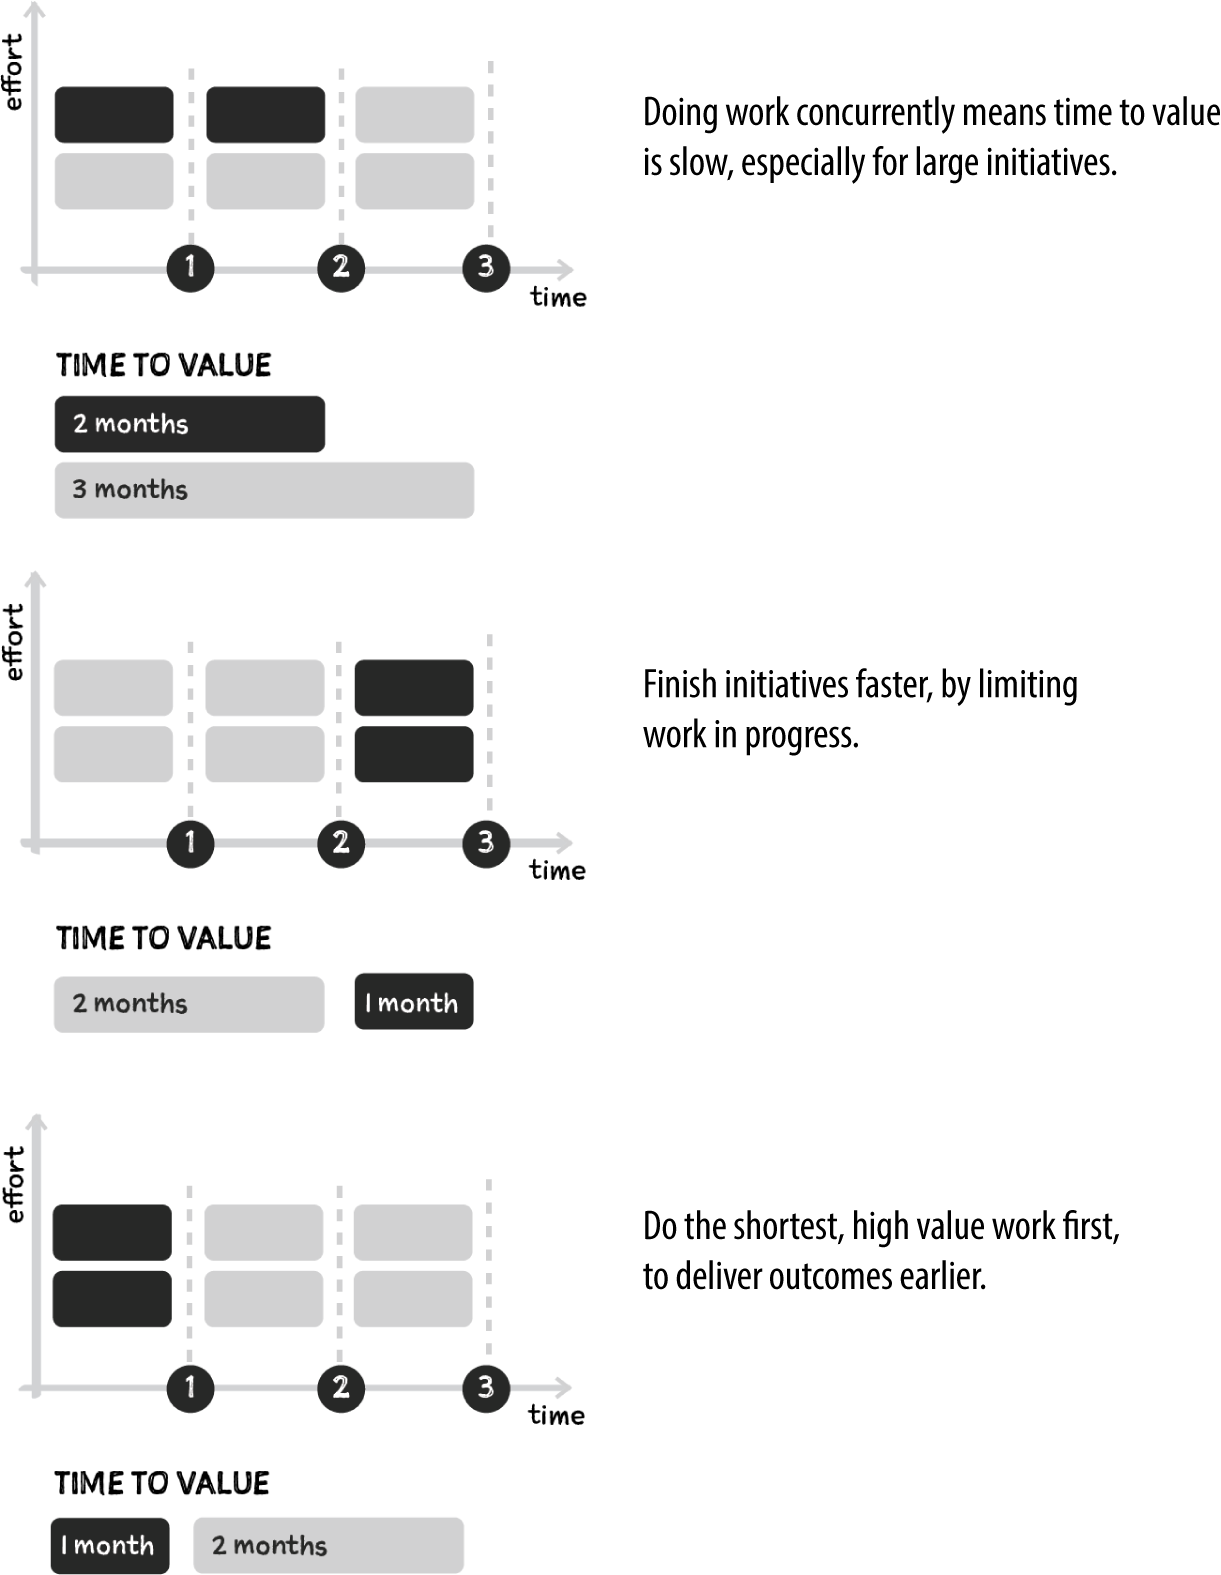 Two initiatives of different sizes can be sequenced to reduce time to value (source: Lean Enterprise12)